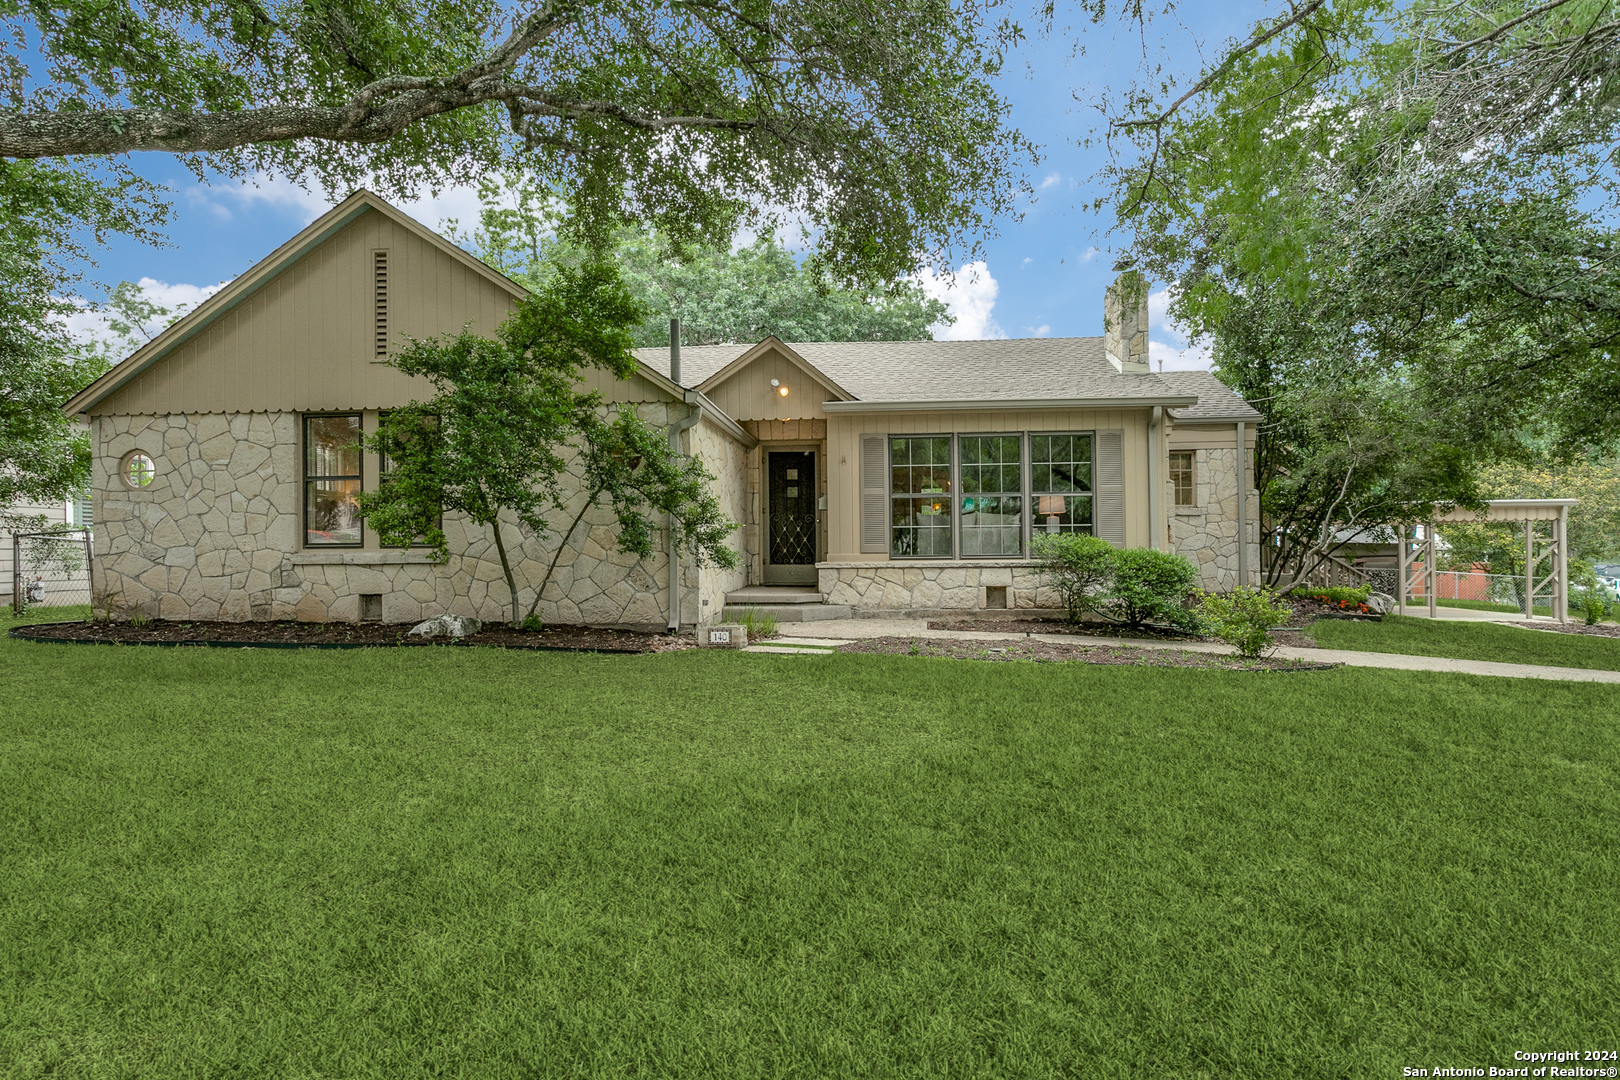 Photo of 140 Castano Ave in Alamo Heights, TX